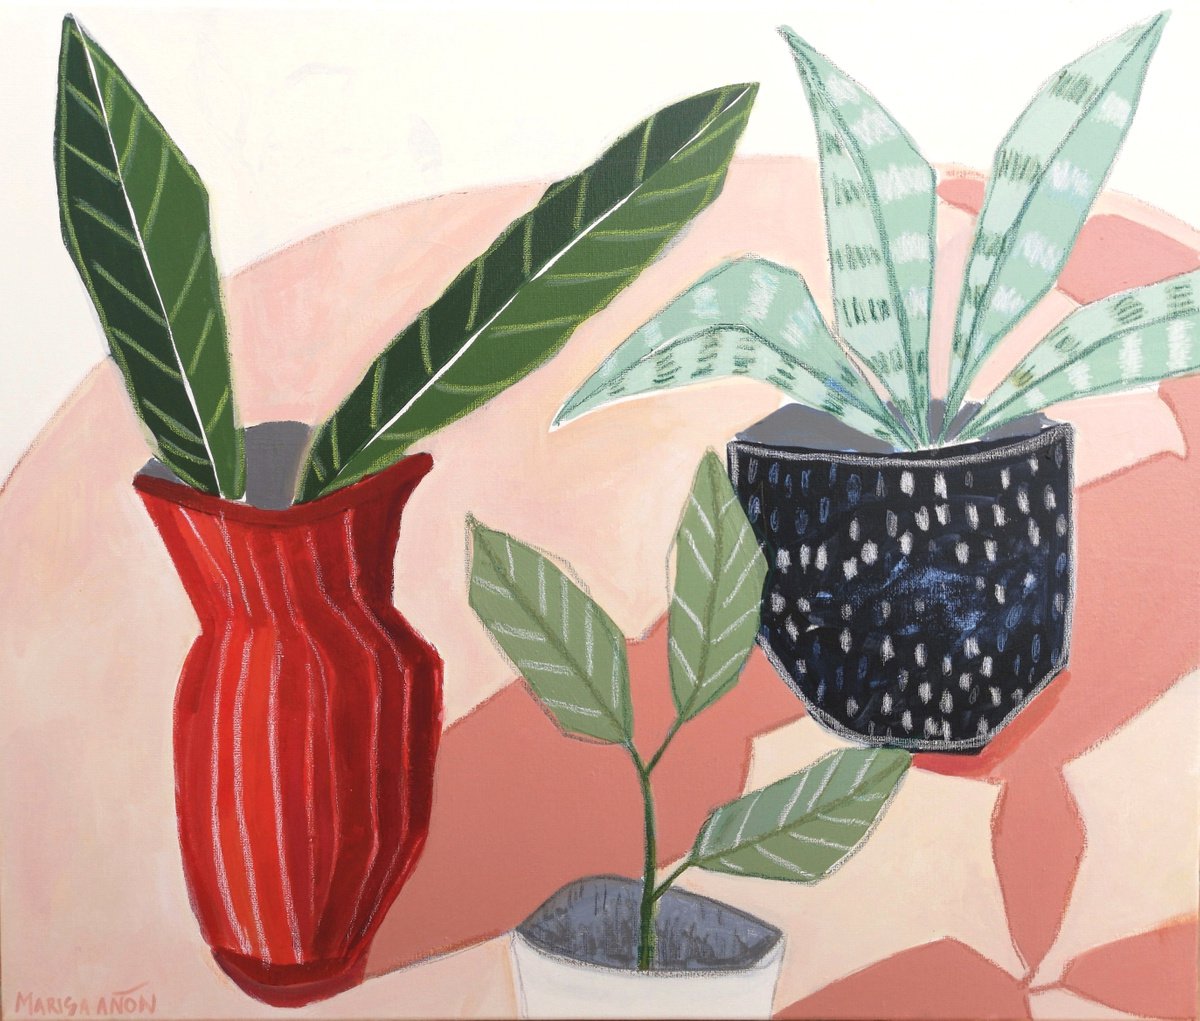 The Potted Plants III by Marisa An